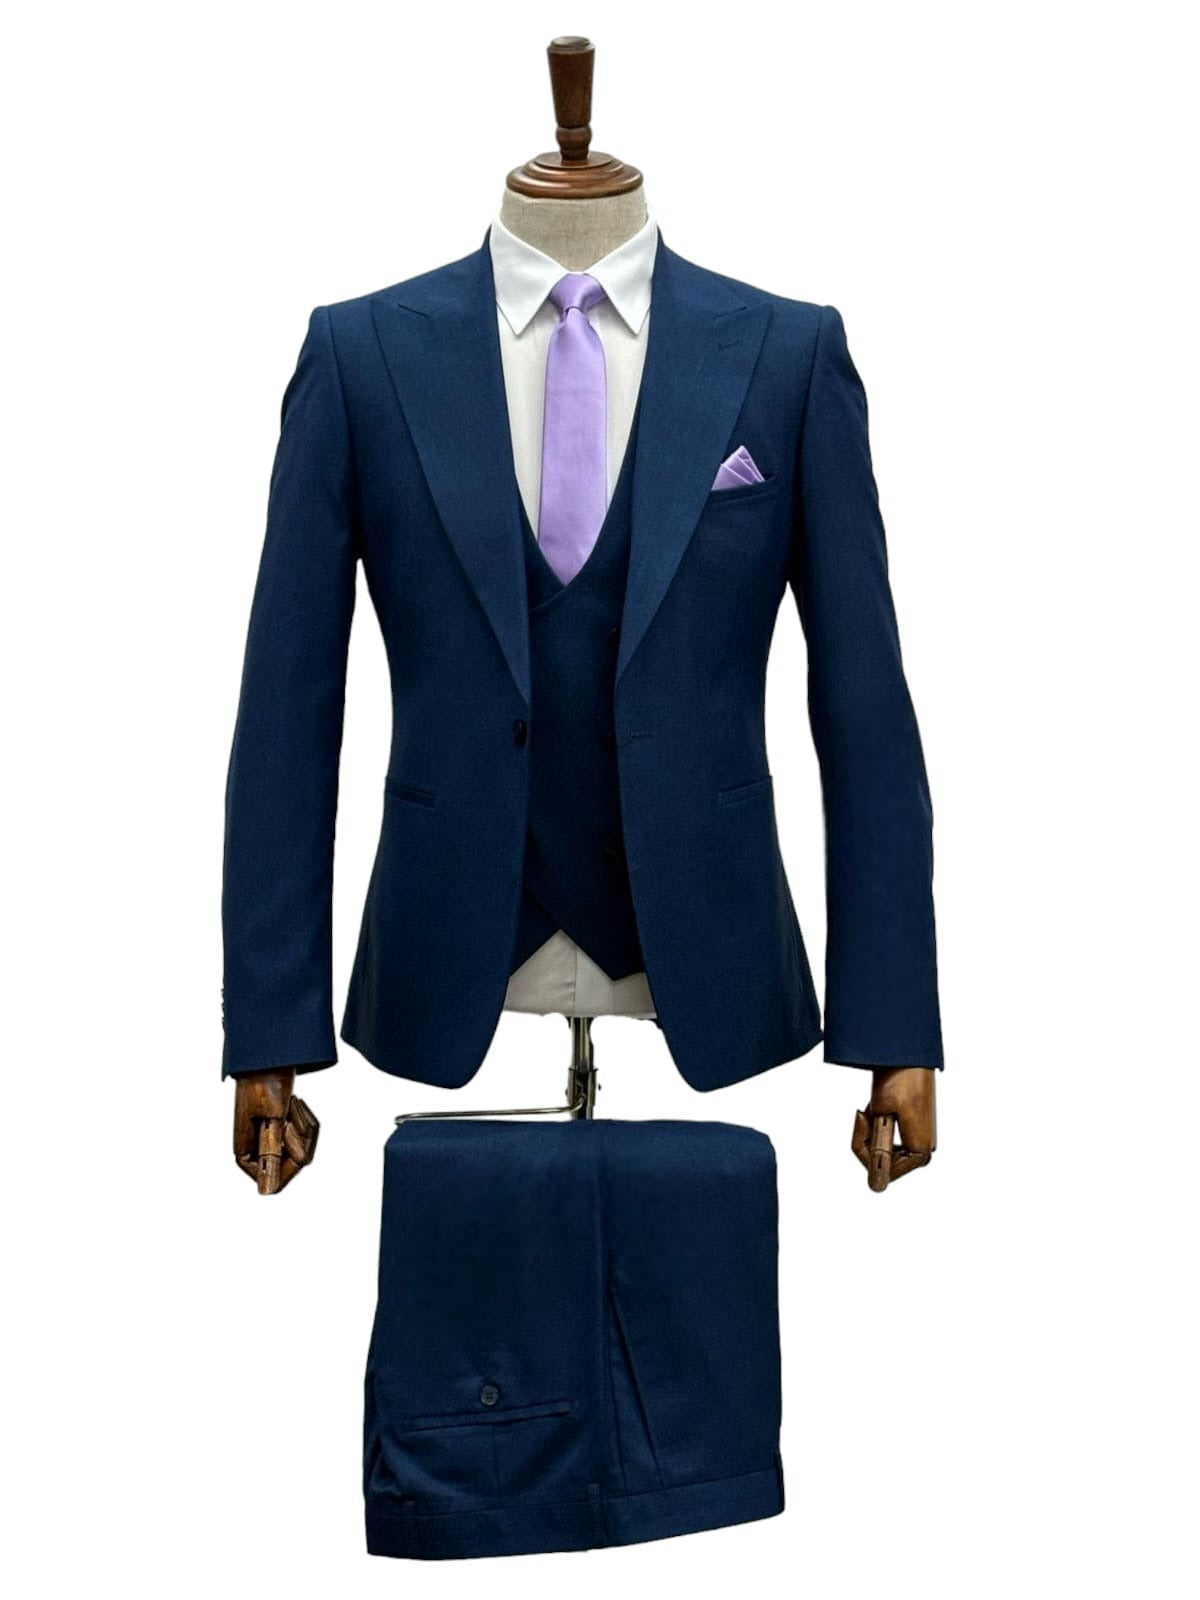 Giovanni Testi Suits With Double Breasted Vest - 3 Pieces  Peak Lapel  in Navy